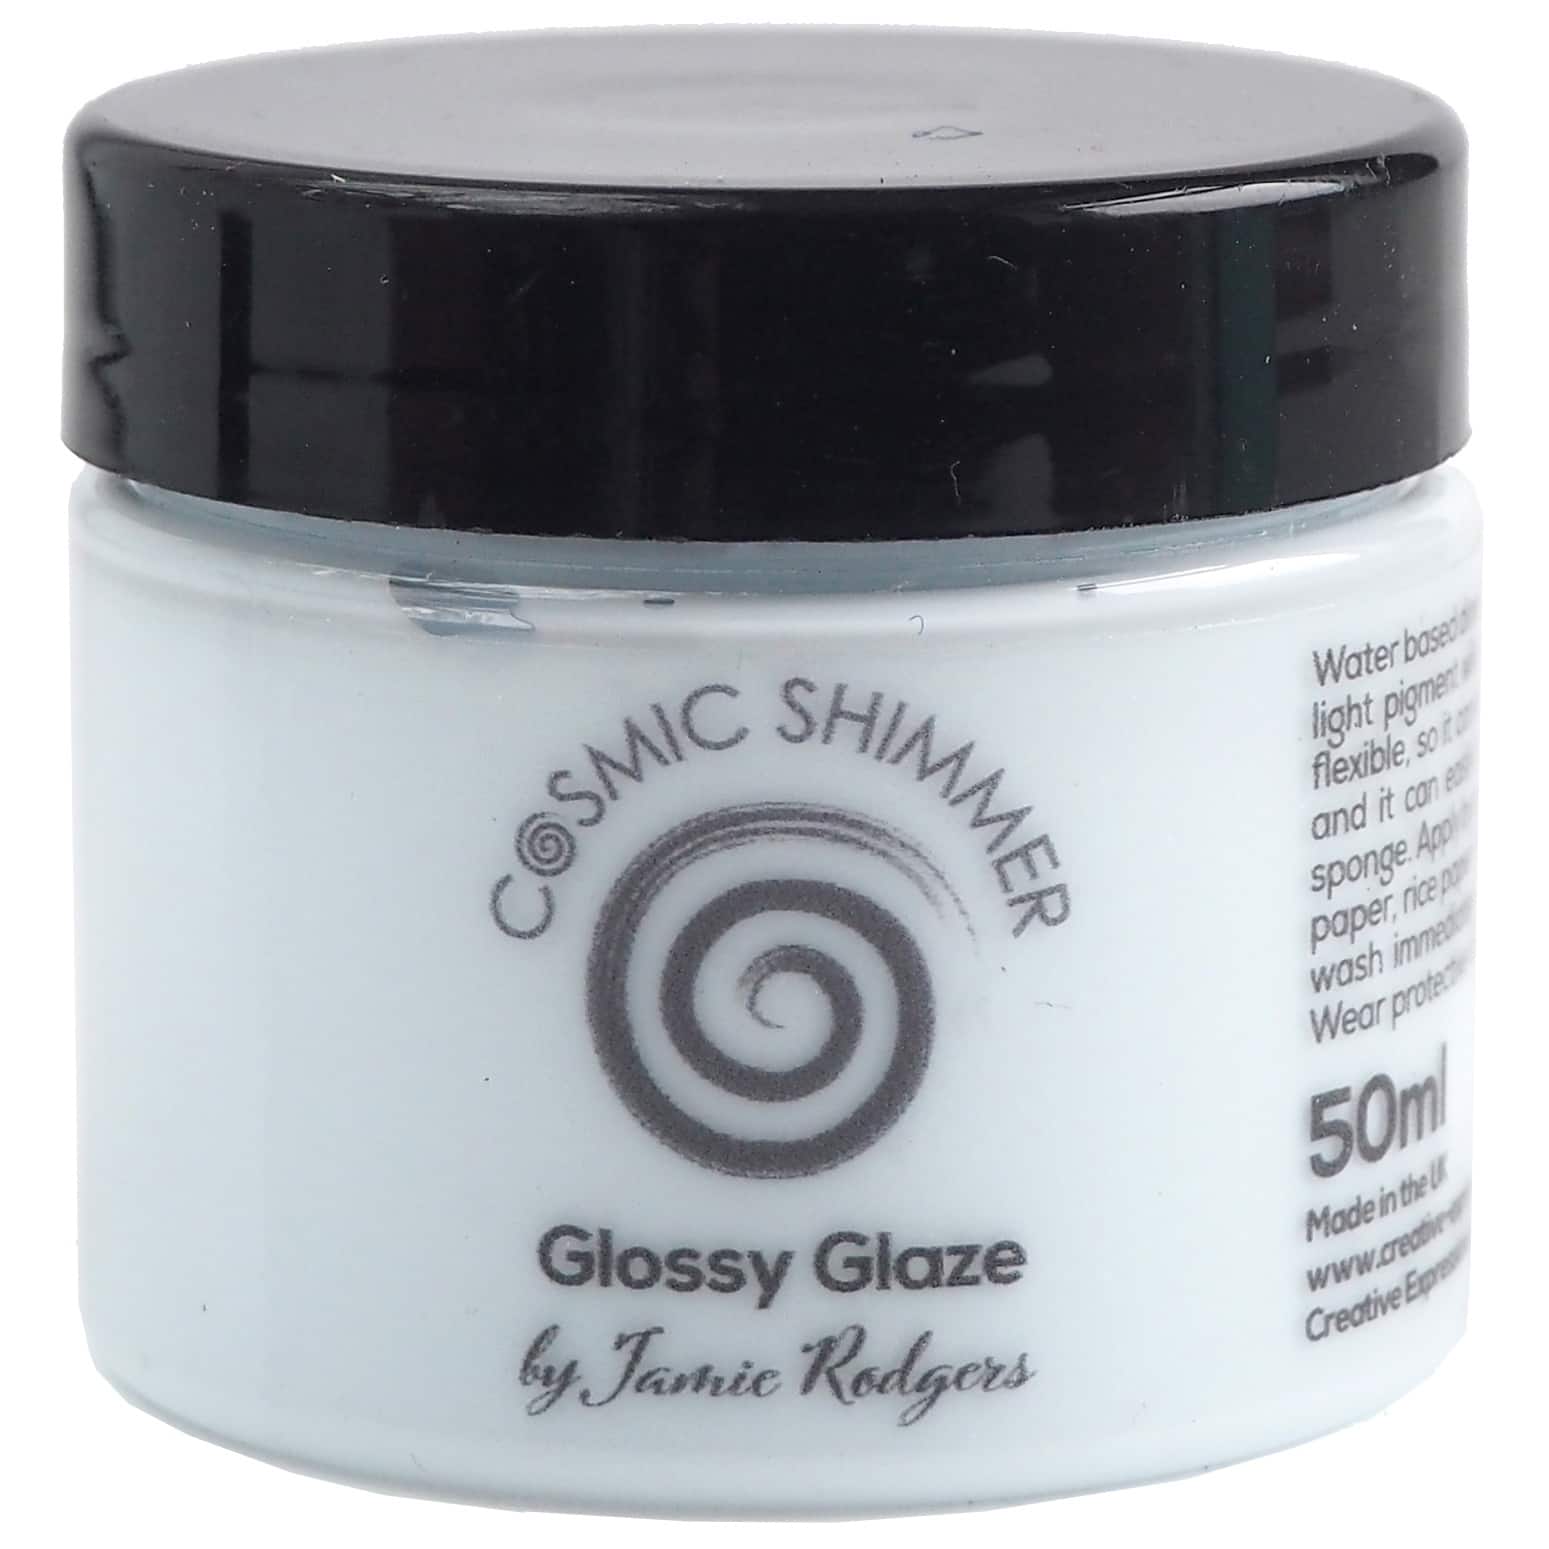 Cosmic Shimmer Glossy Glaze by Jamie Rodgers